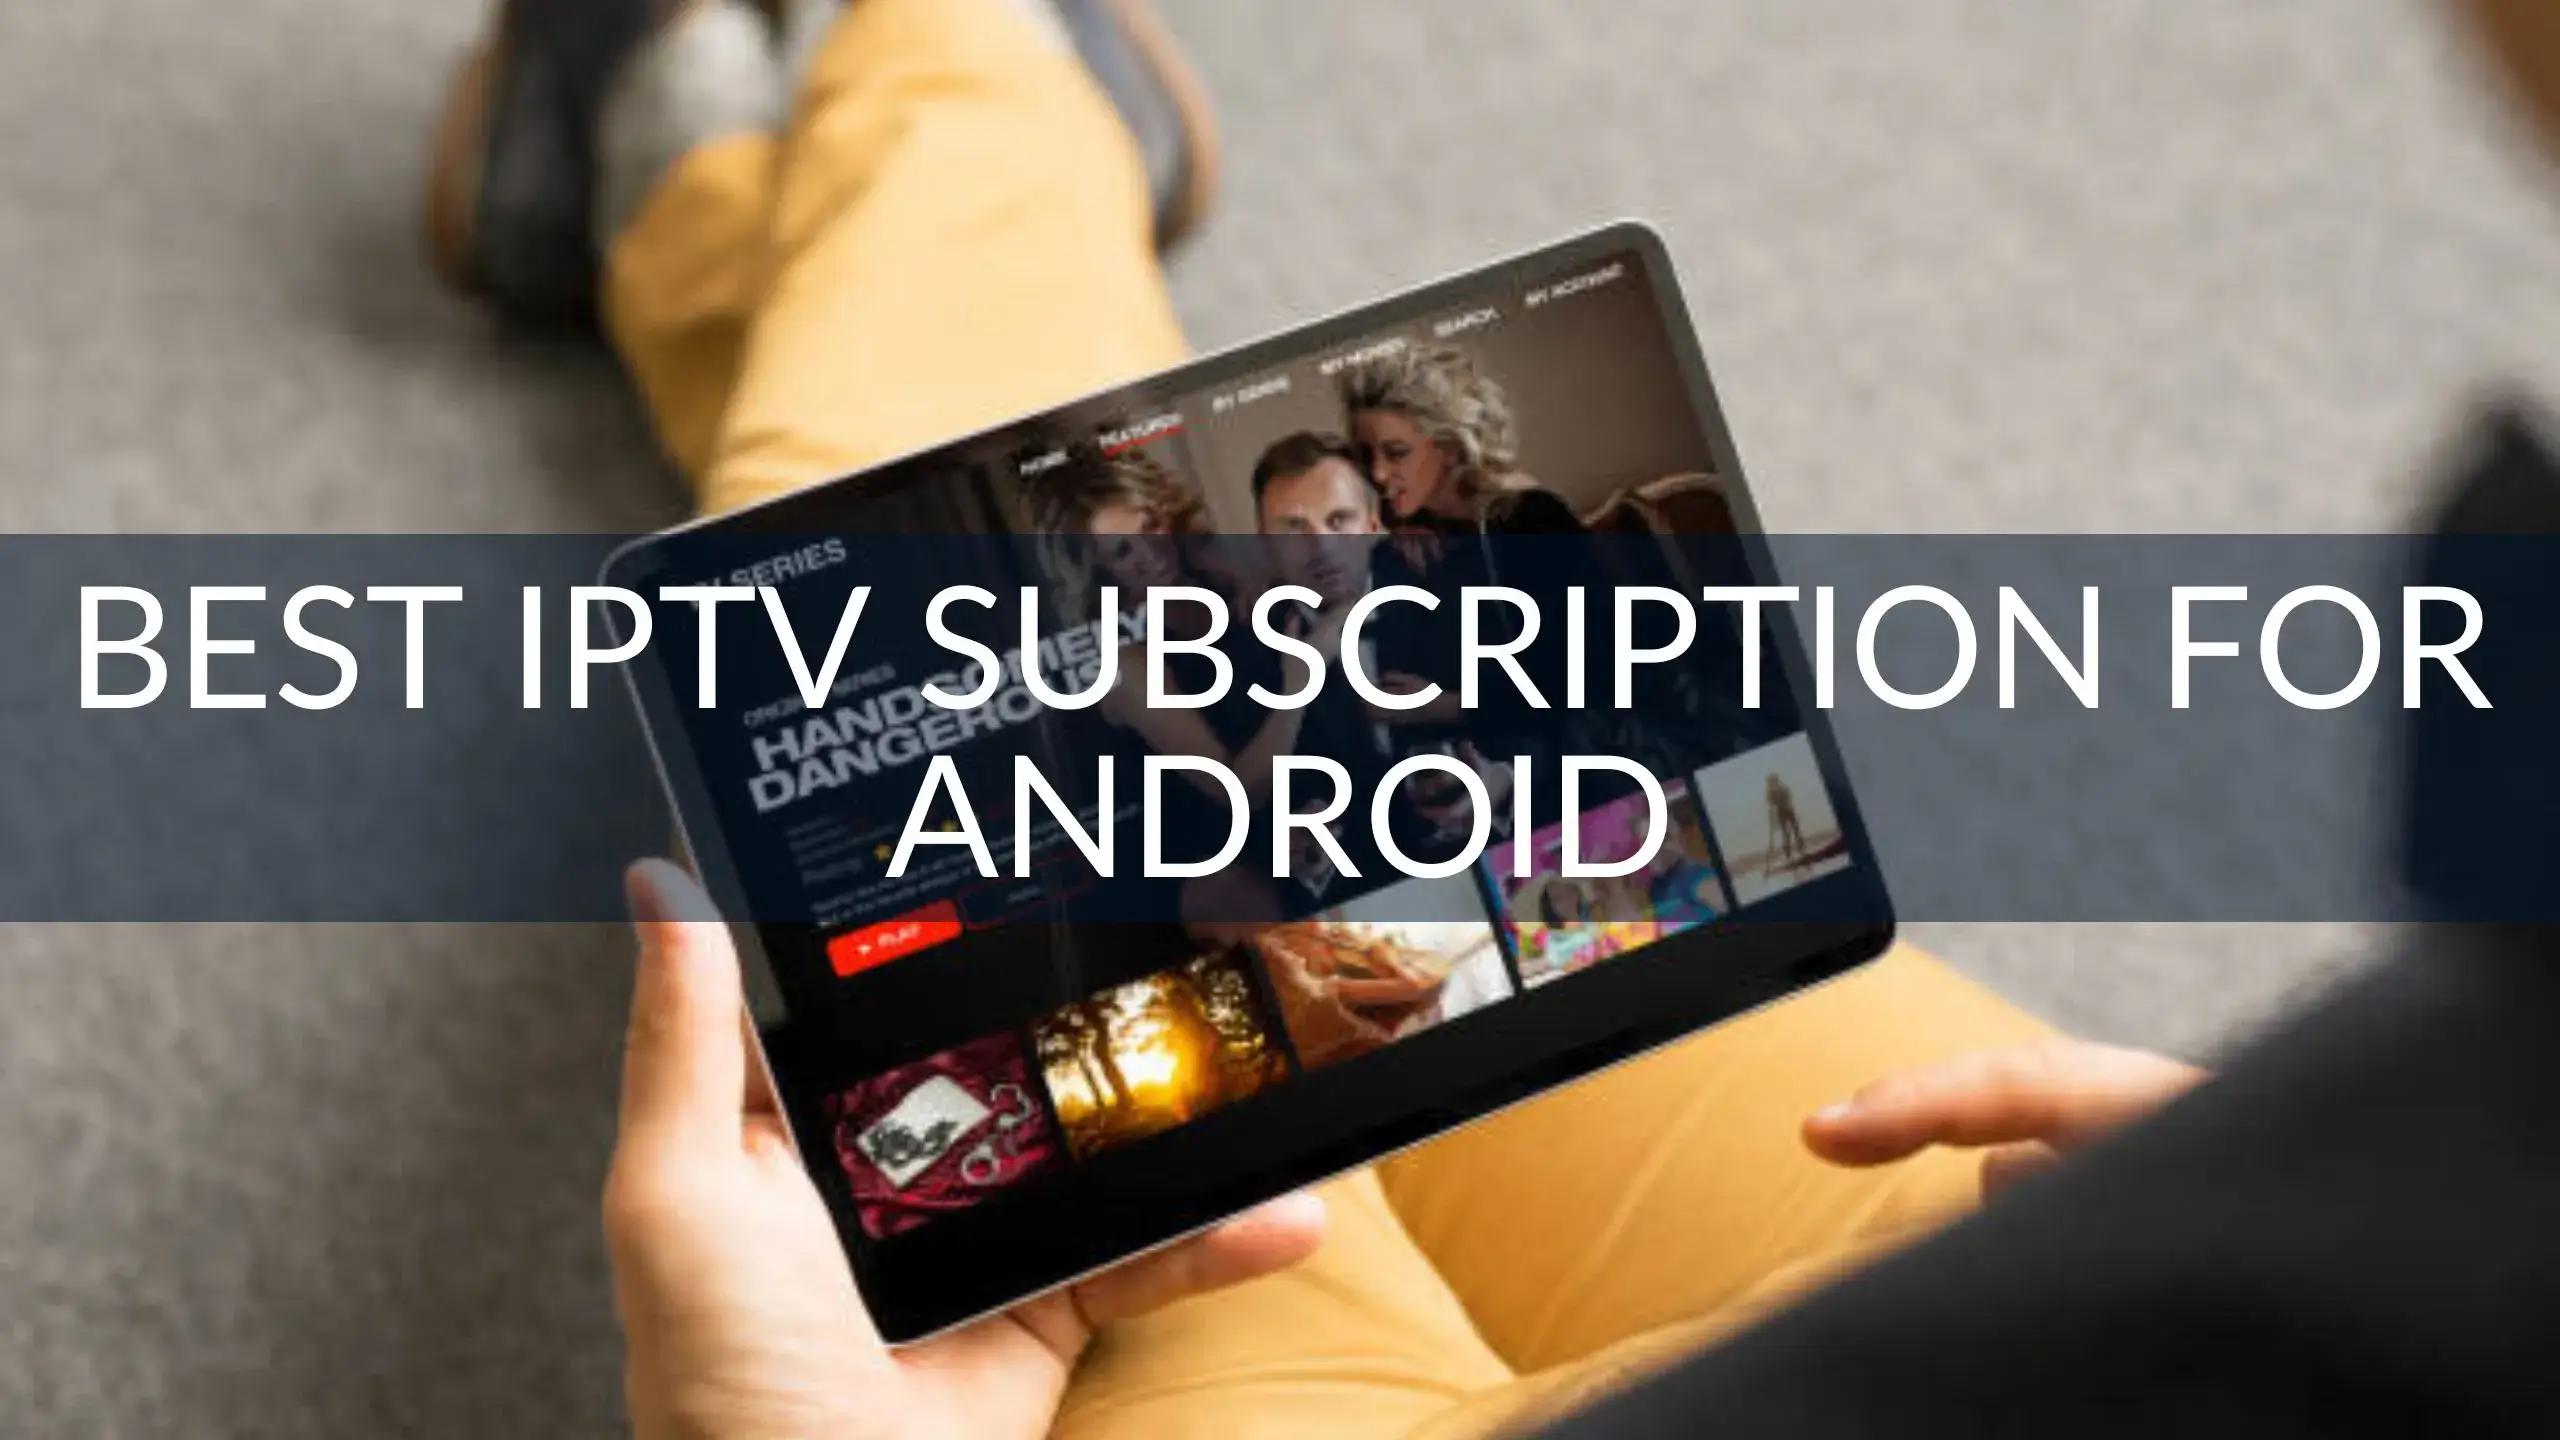 Best IPTV Subscription for Android